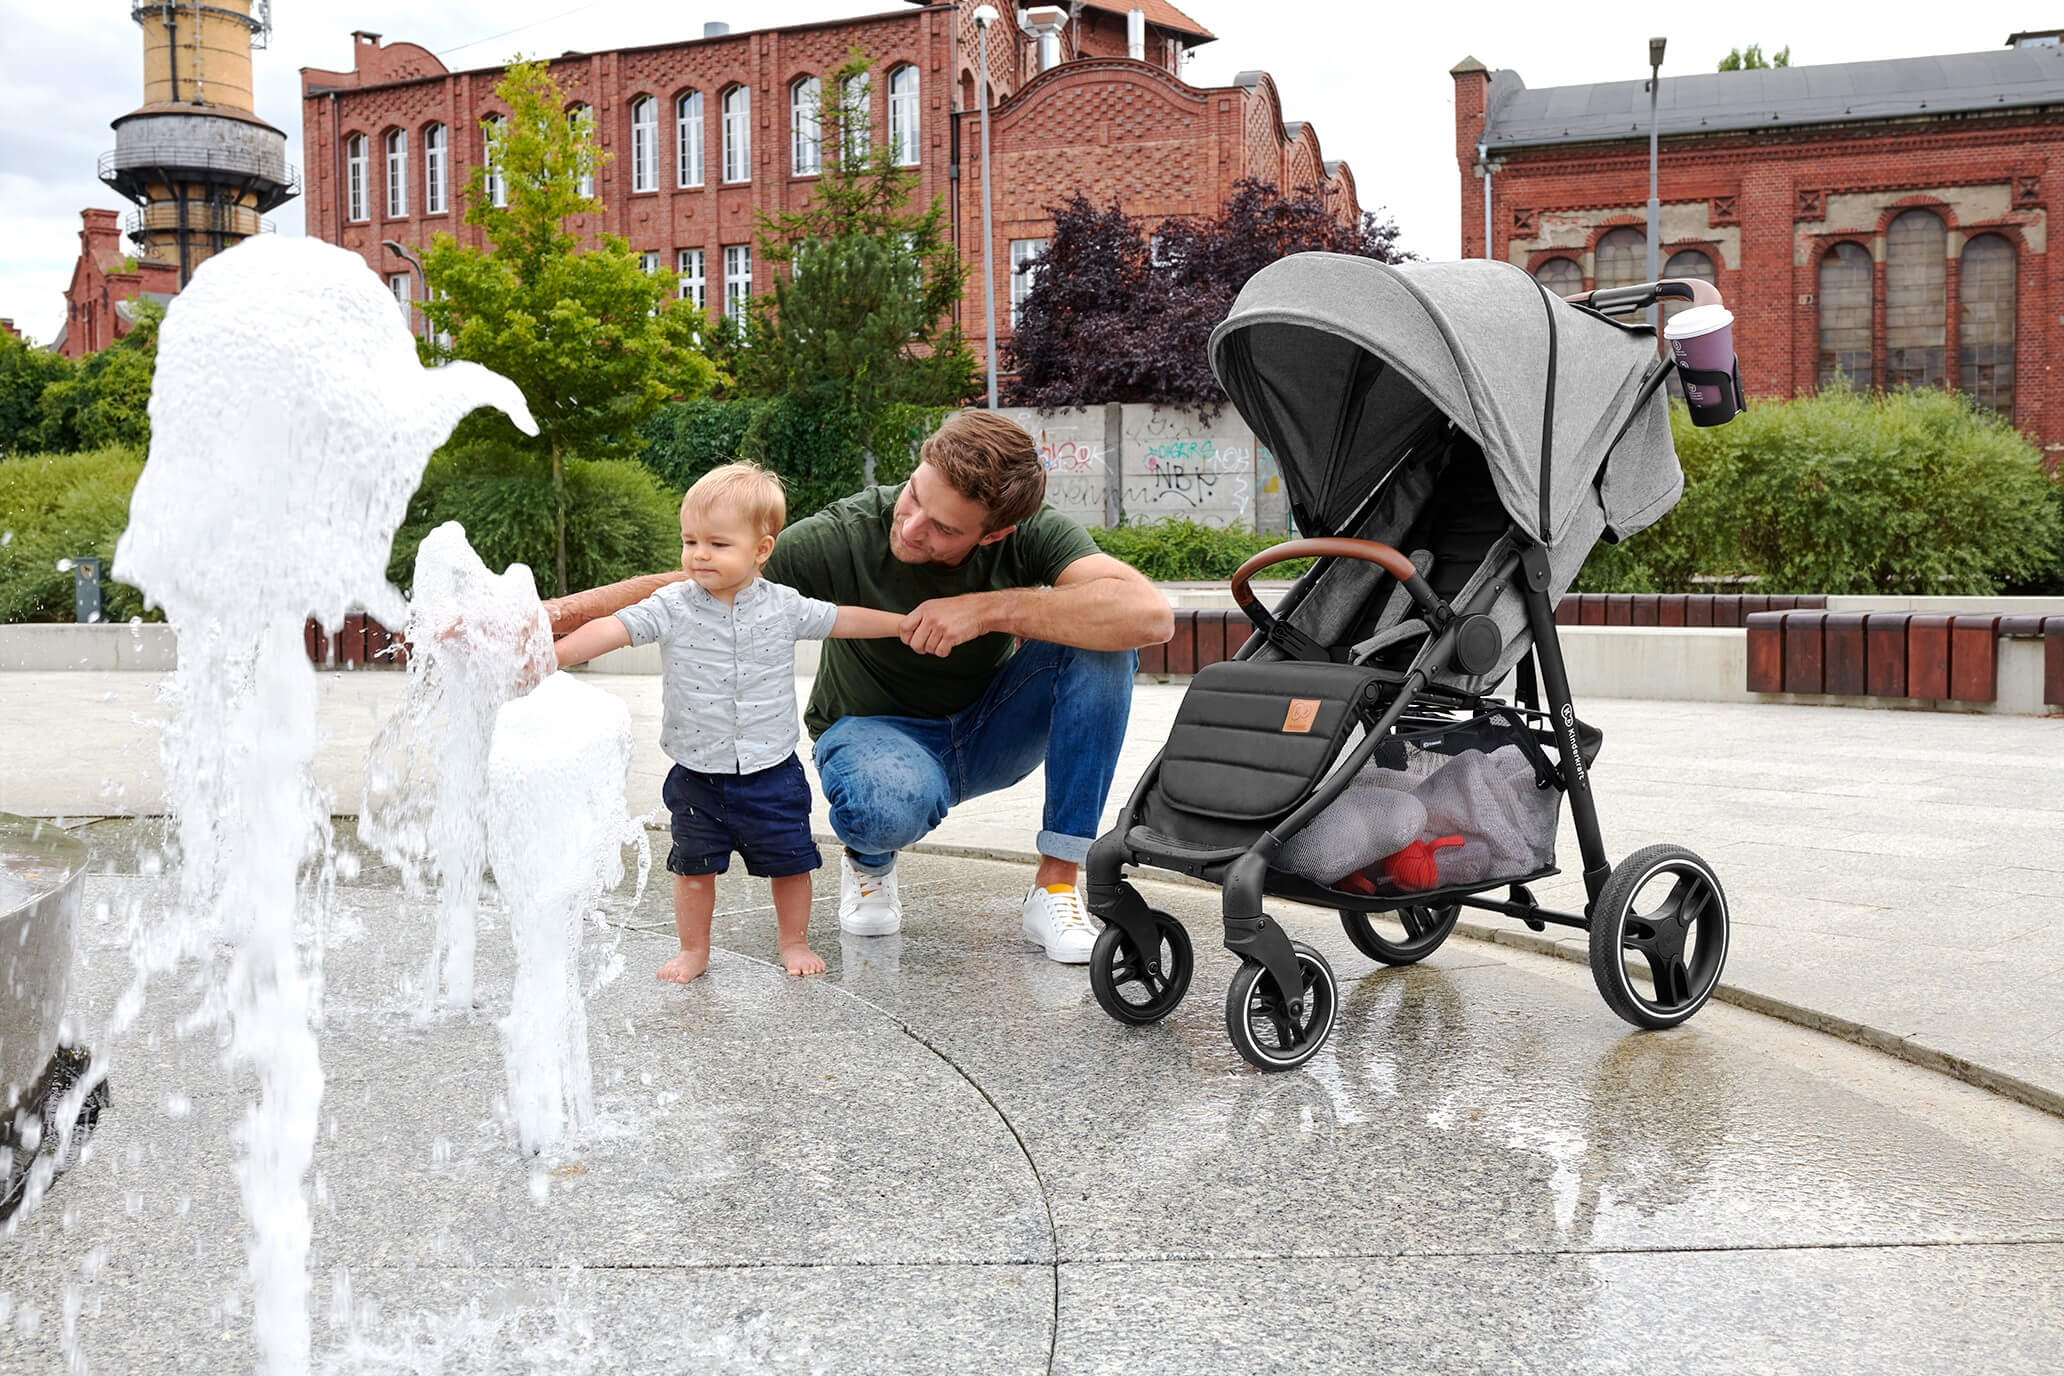 Easy-to-manoeuvre stroller with shock absorbers